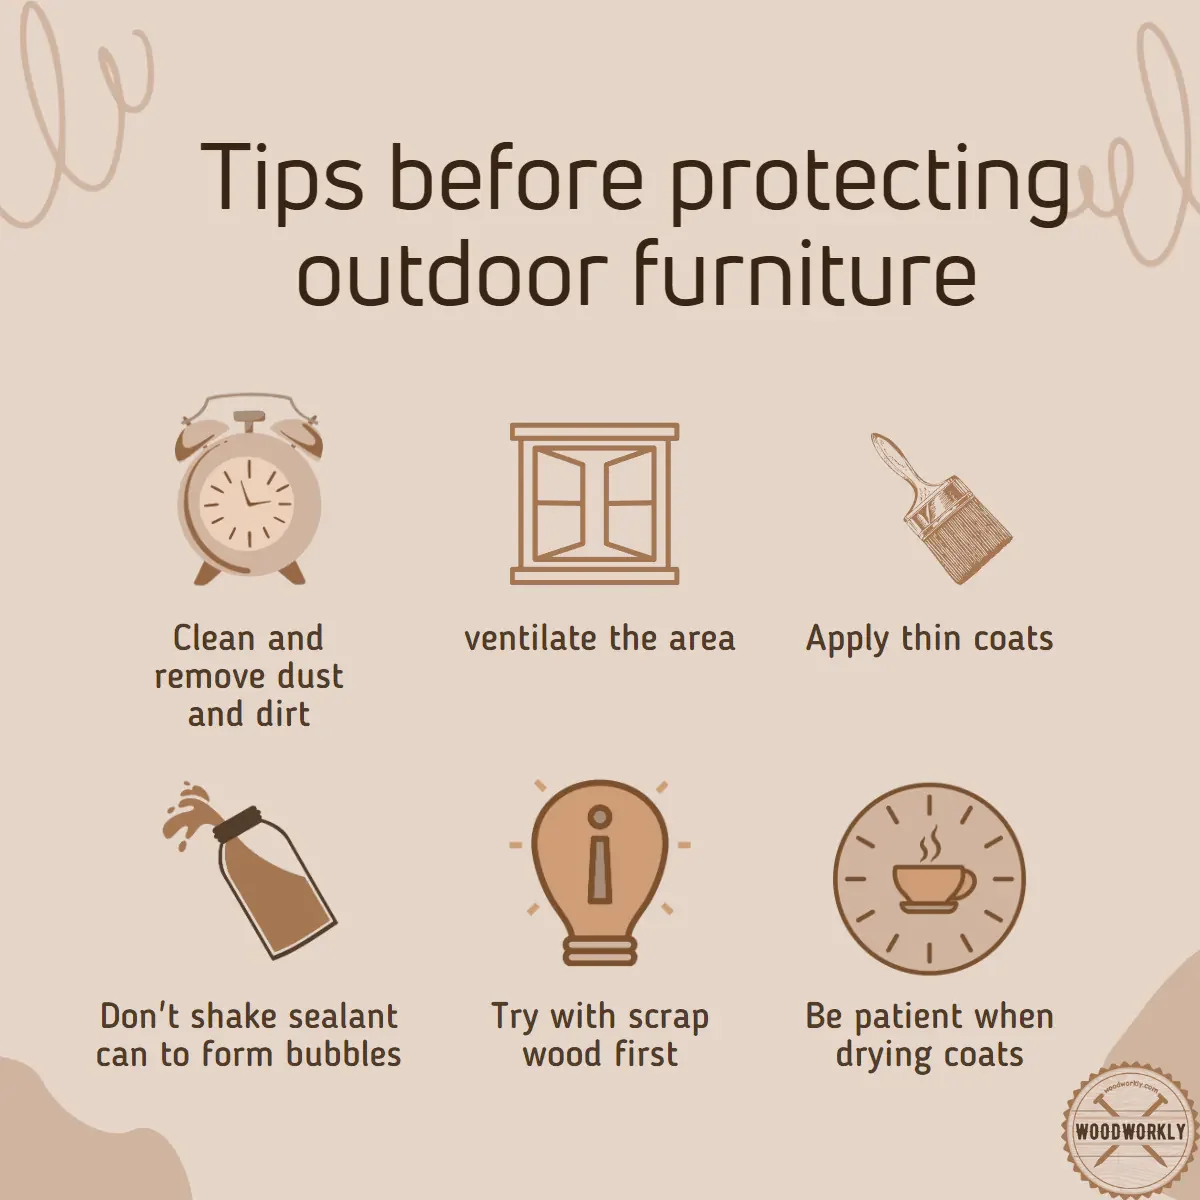 Tips before protecting outdoor furniture